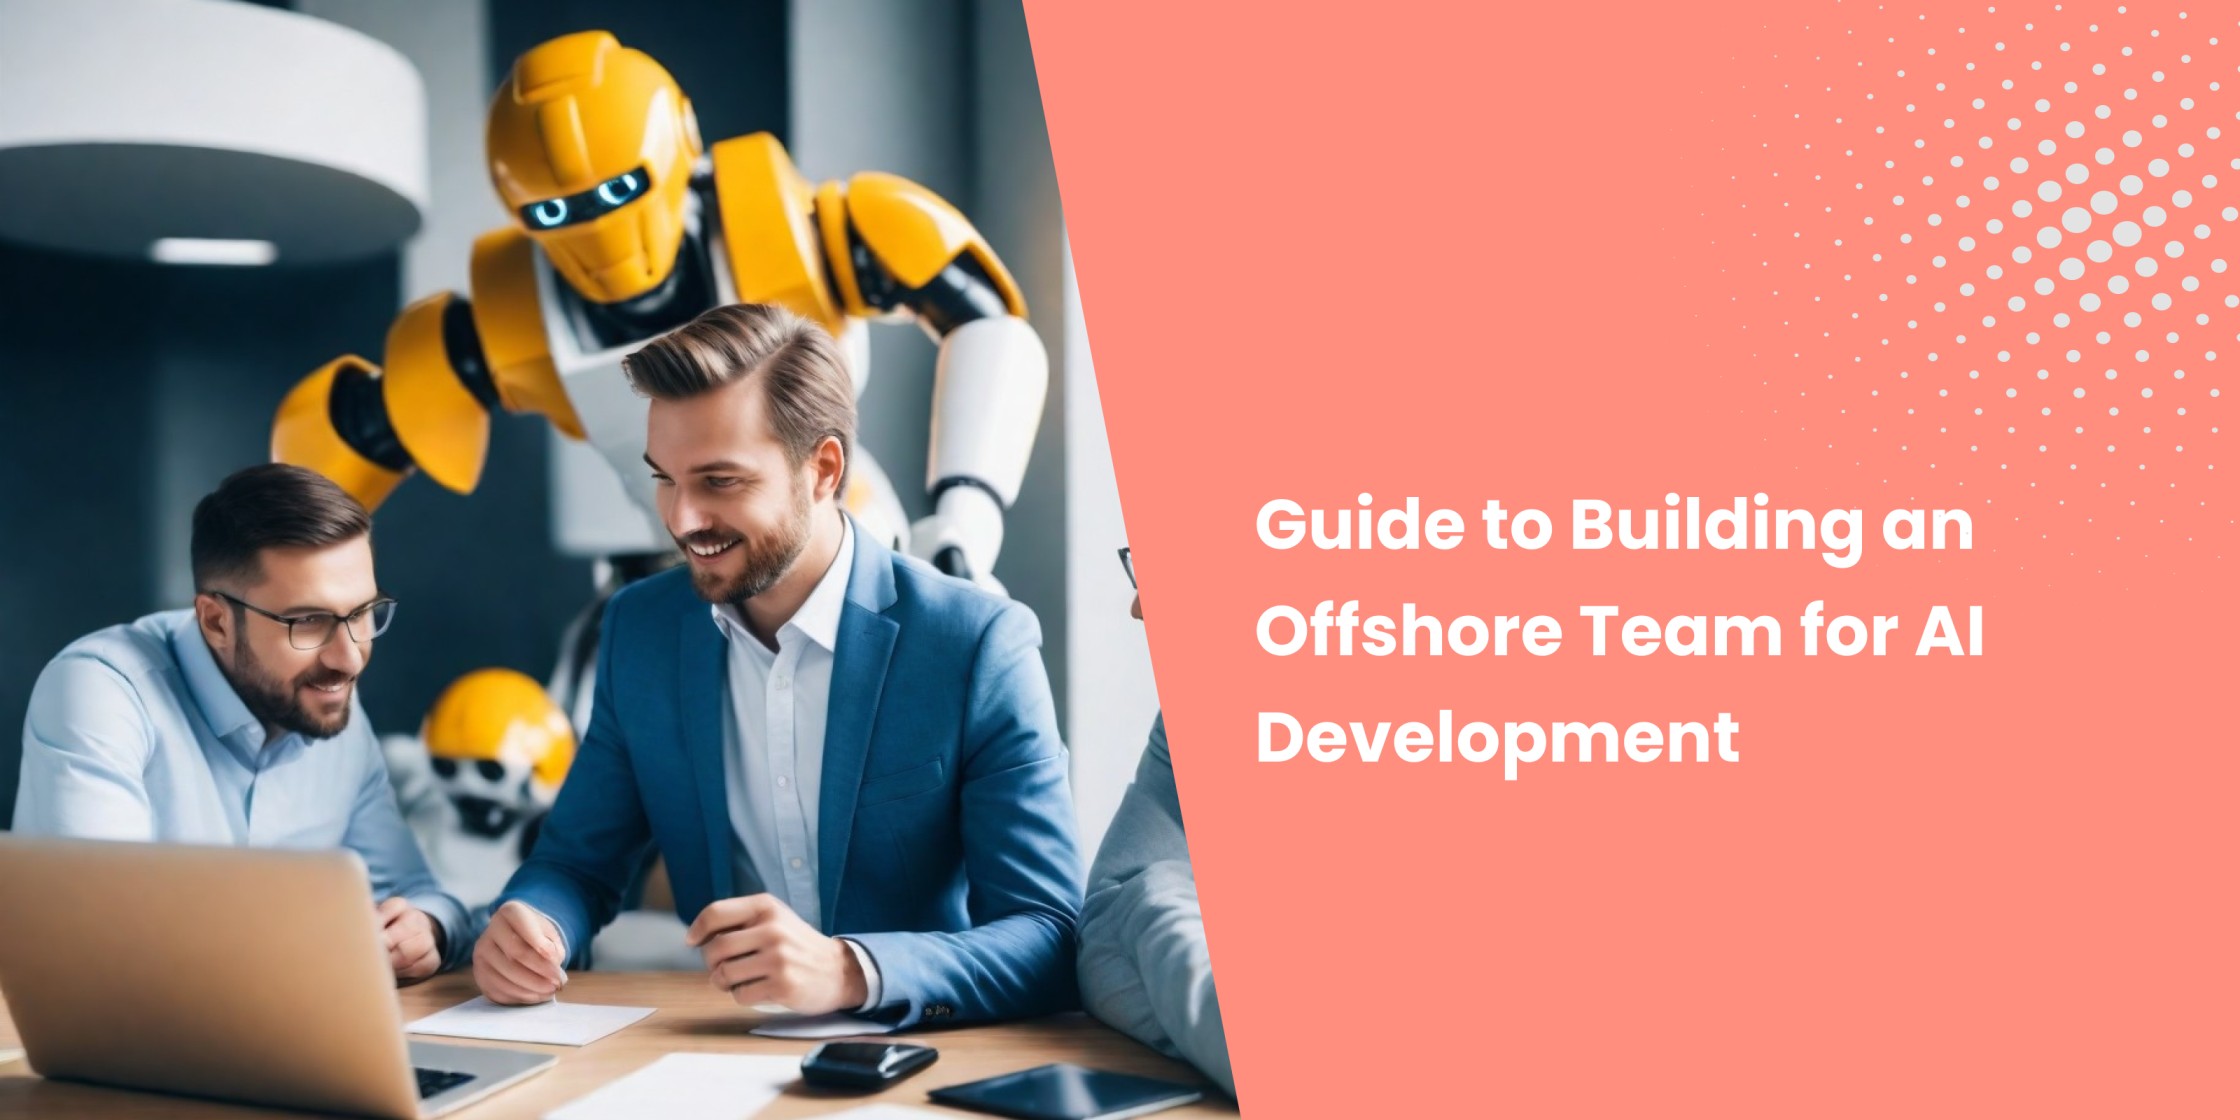 Title image for a guide on building offshore AI teams